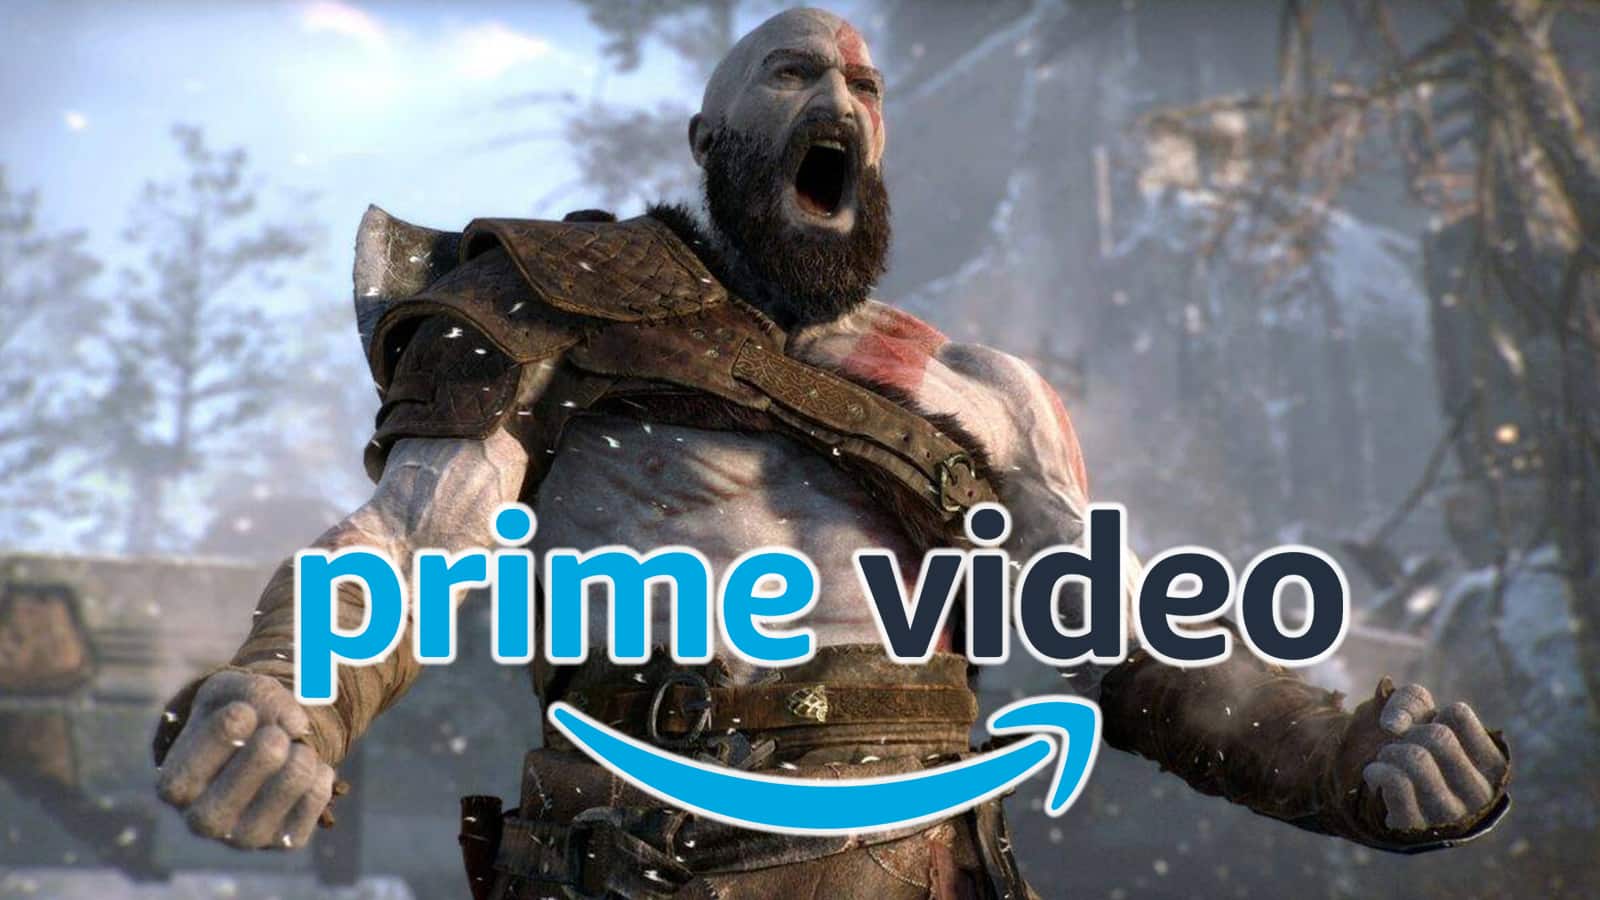 amazon reportedly making god of war tv series live action